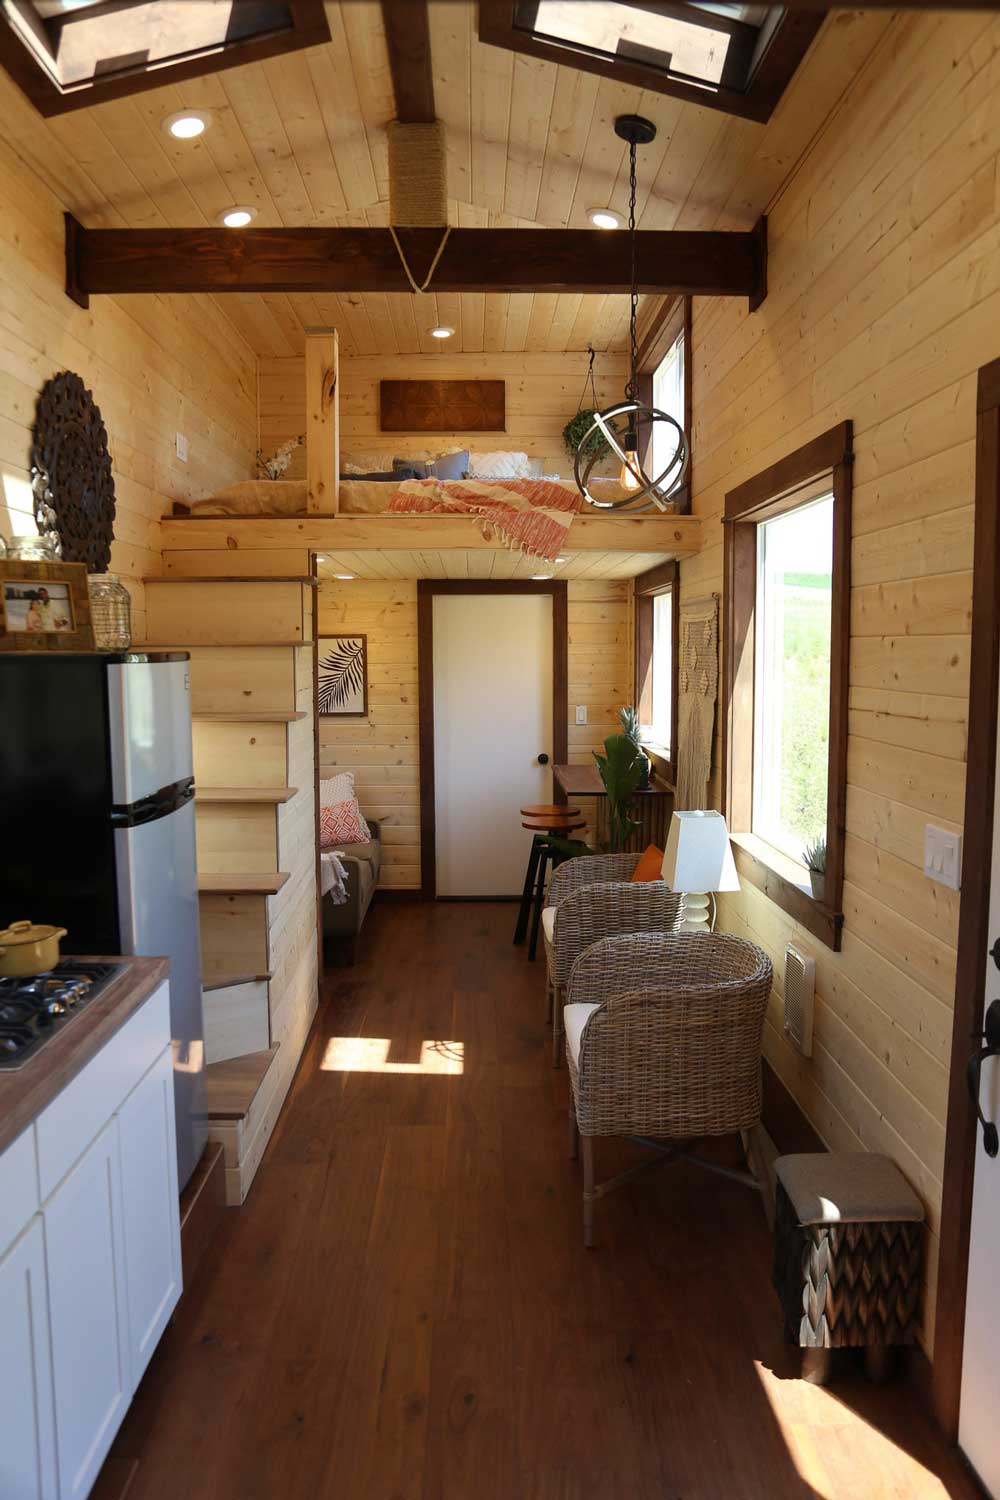 The Tropical Getaway custom tiny house's kitchen and living room